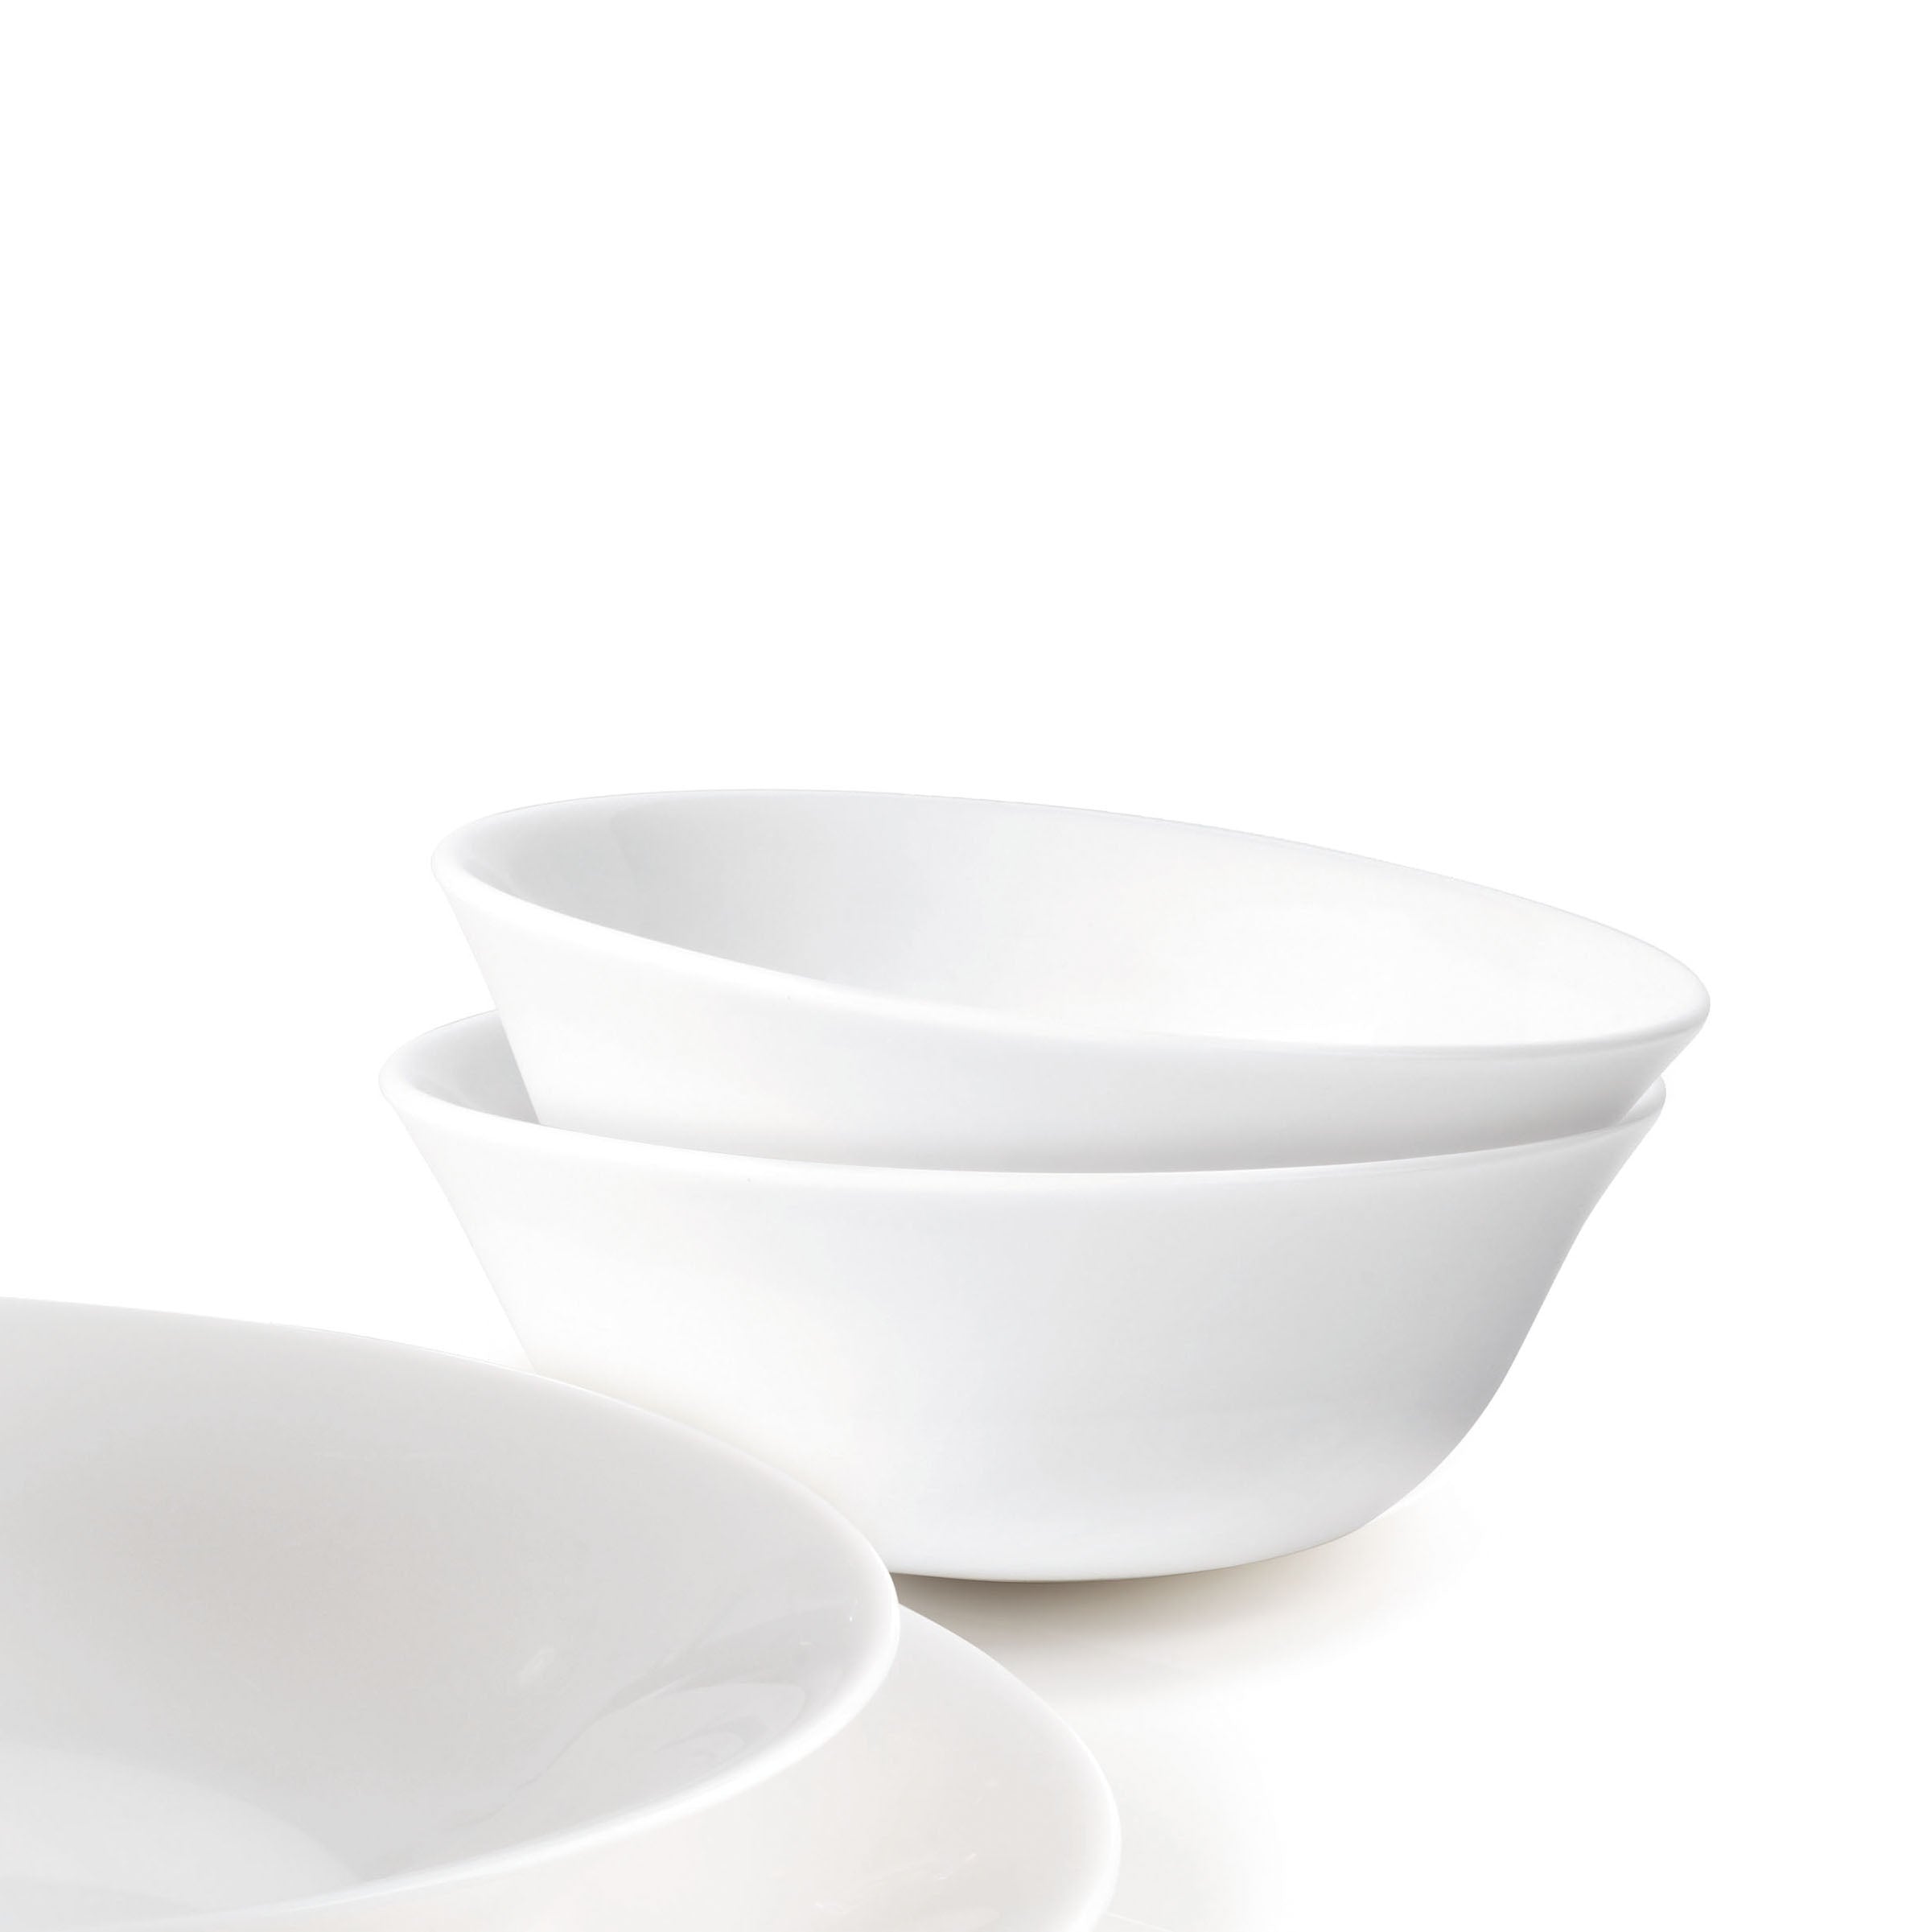 Bormioli Rocco 18 piece White Moon Dinnerware, Sets For 6,  Tempered Opal Glass Dishes, Dishwasher & Microwave Safe.: Dinnerware Sets